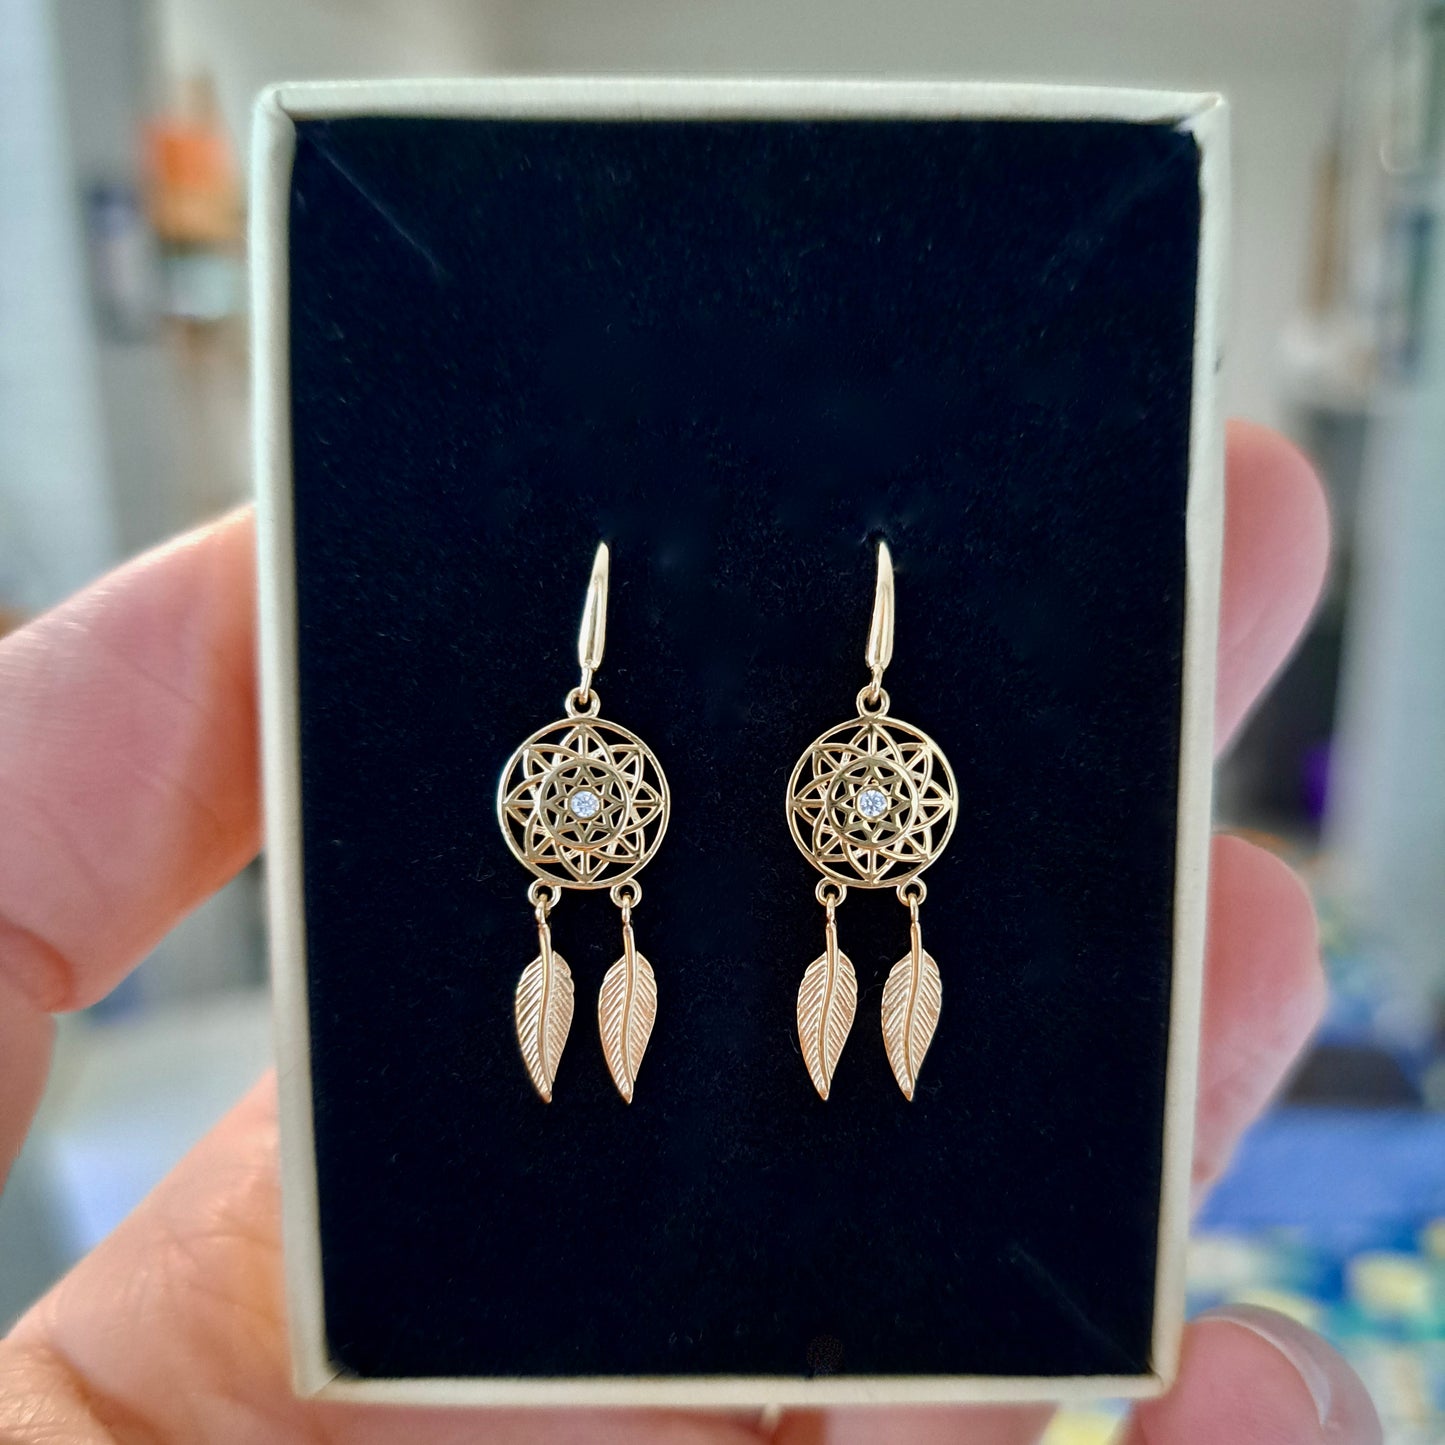 Pre-owned 9ct Gold and CZ Dream Catcher Dangle Earrings